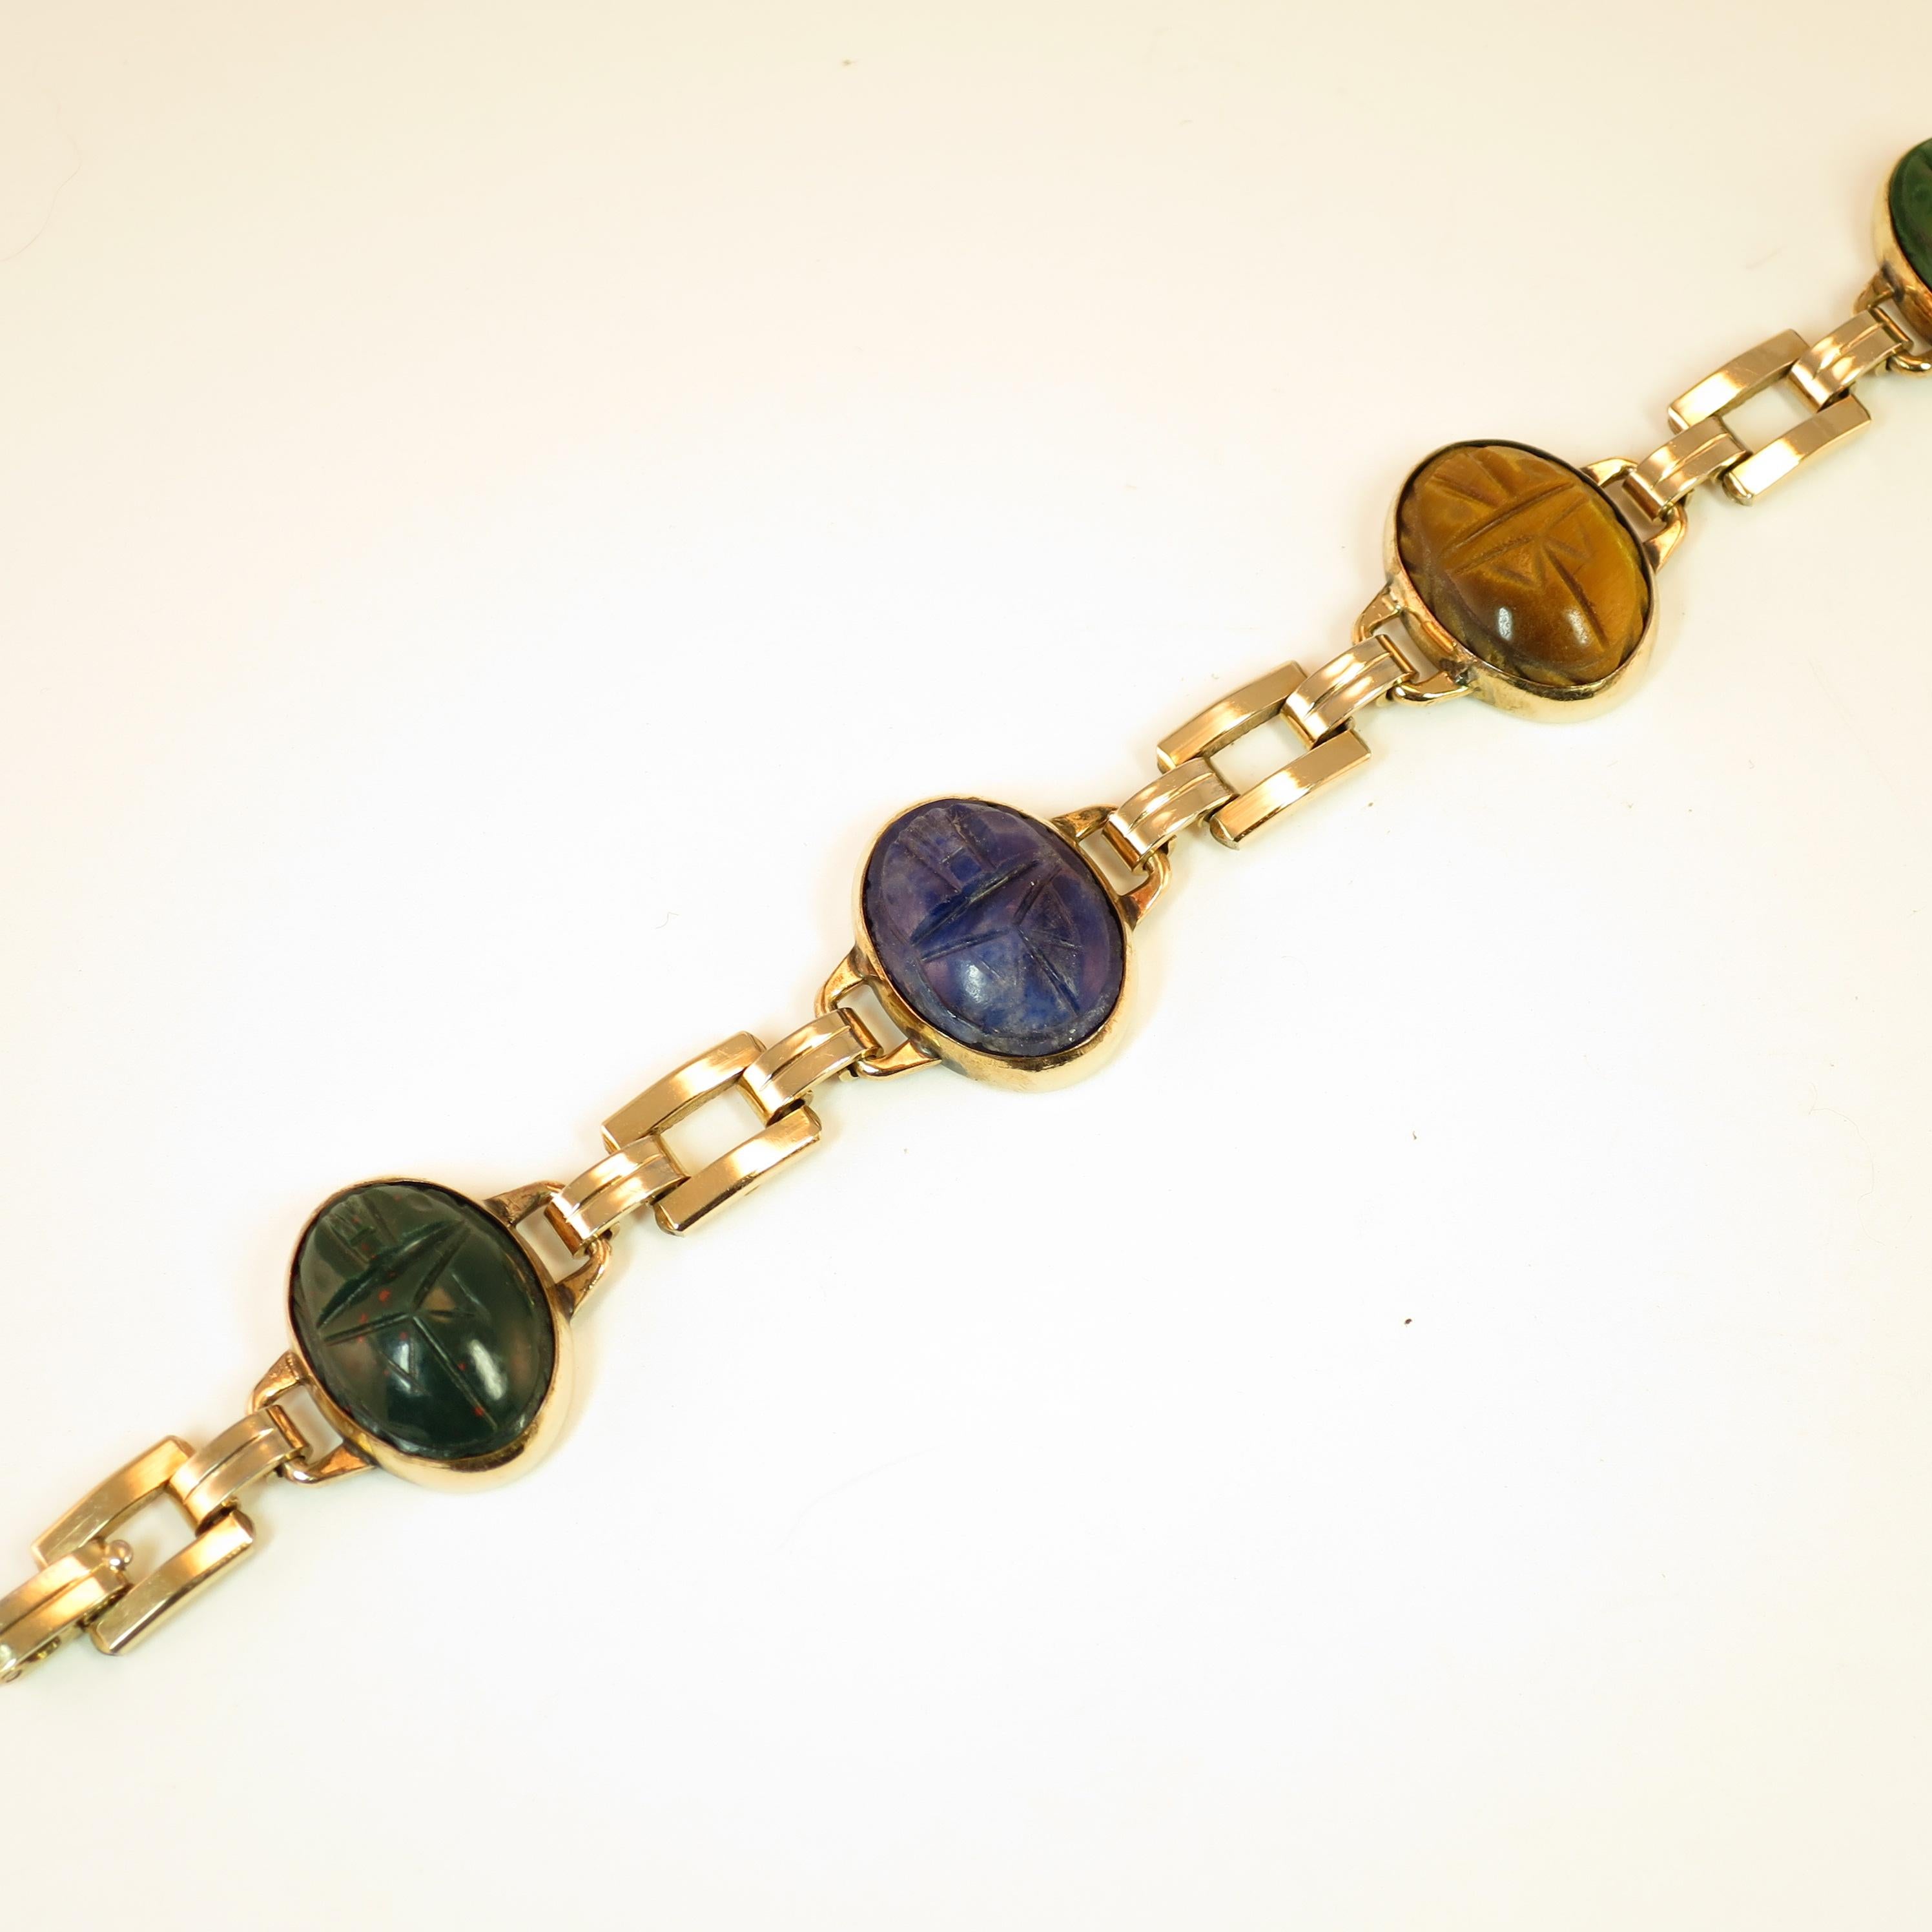 Offered here is an Art Deco Egyptian Revival 10k gold-filled over sterling silver link bracelet by the Engel Brothers of New York, from the 1930s. Open rectangular links alternate with open-back bezel-set oval carved scarabs of semi-precious stones